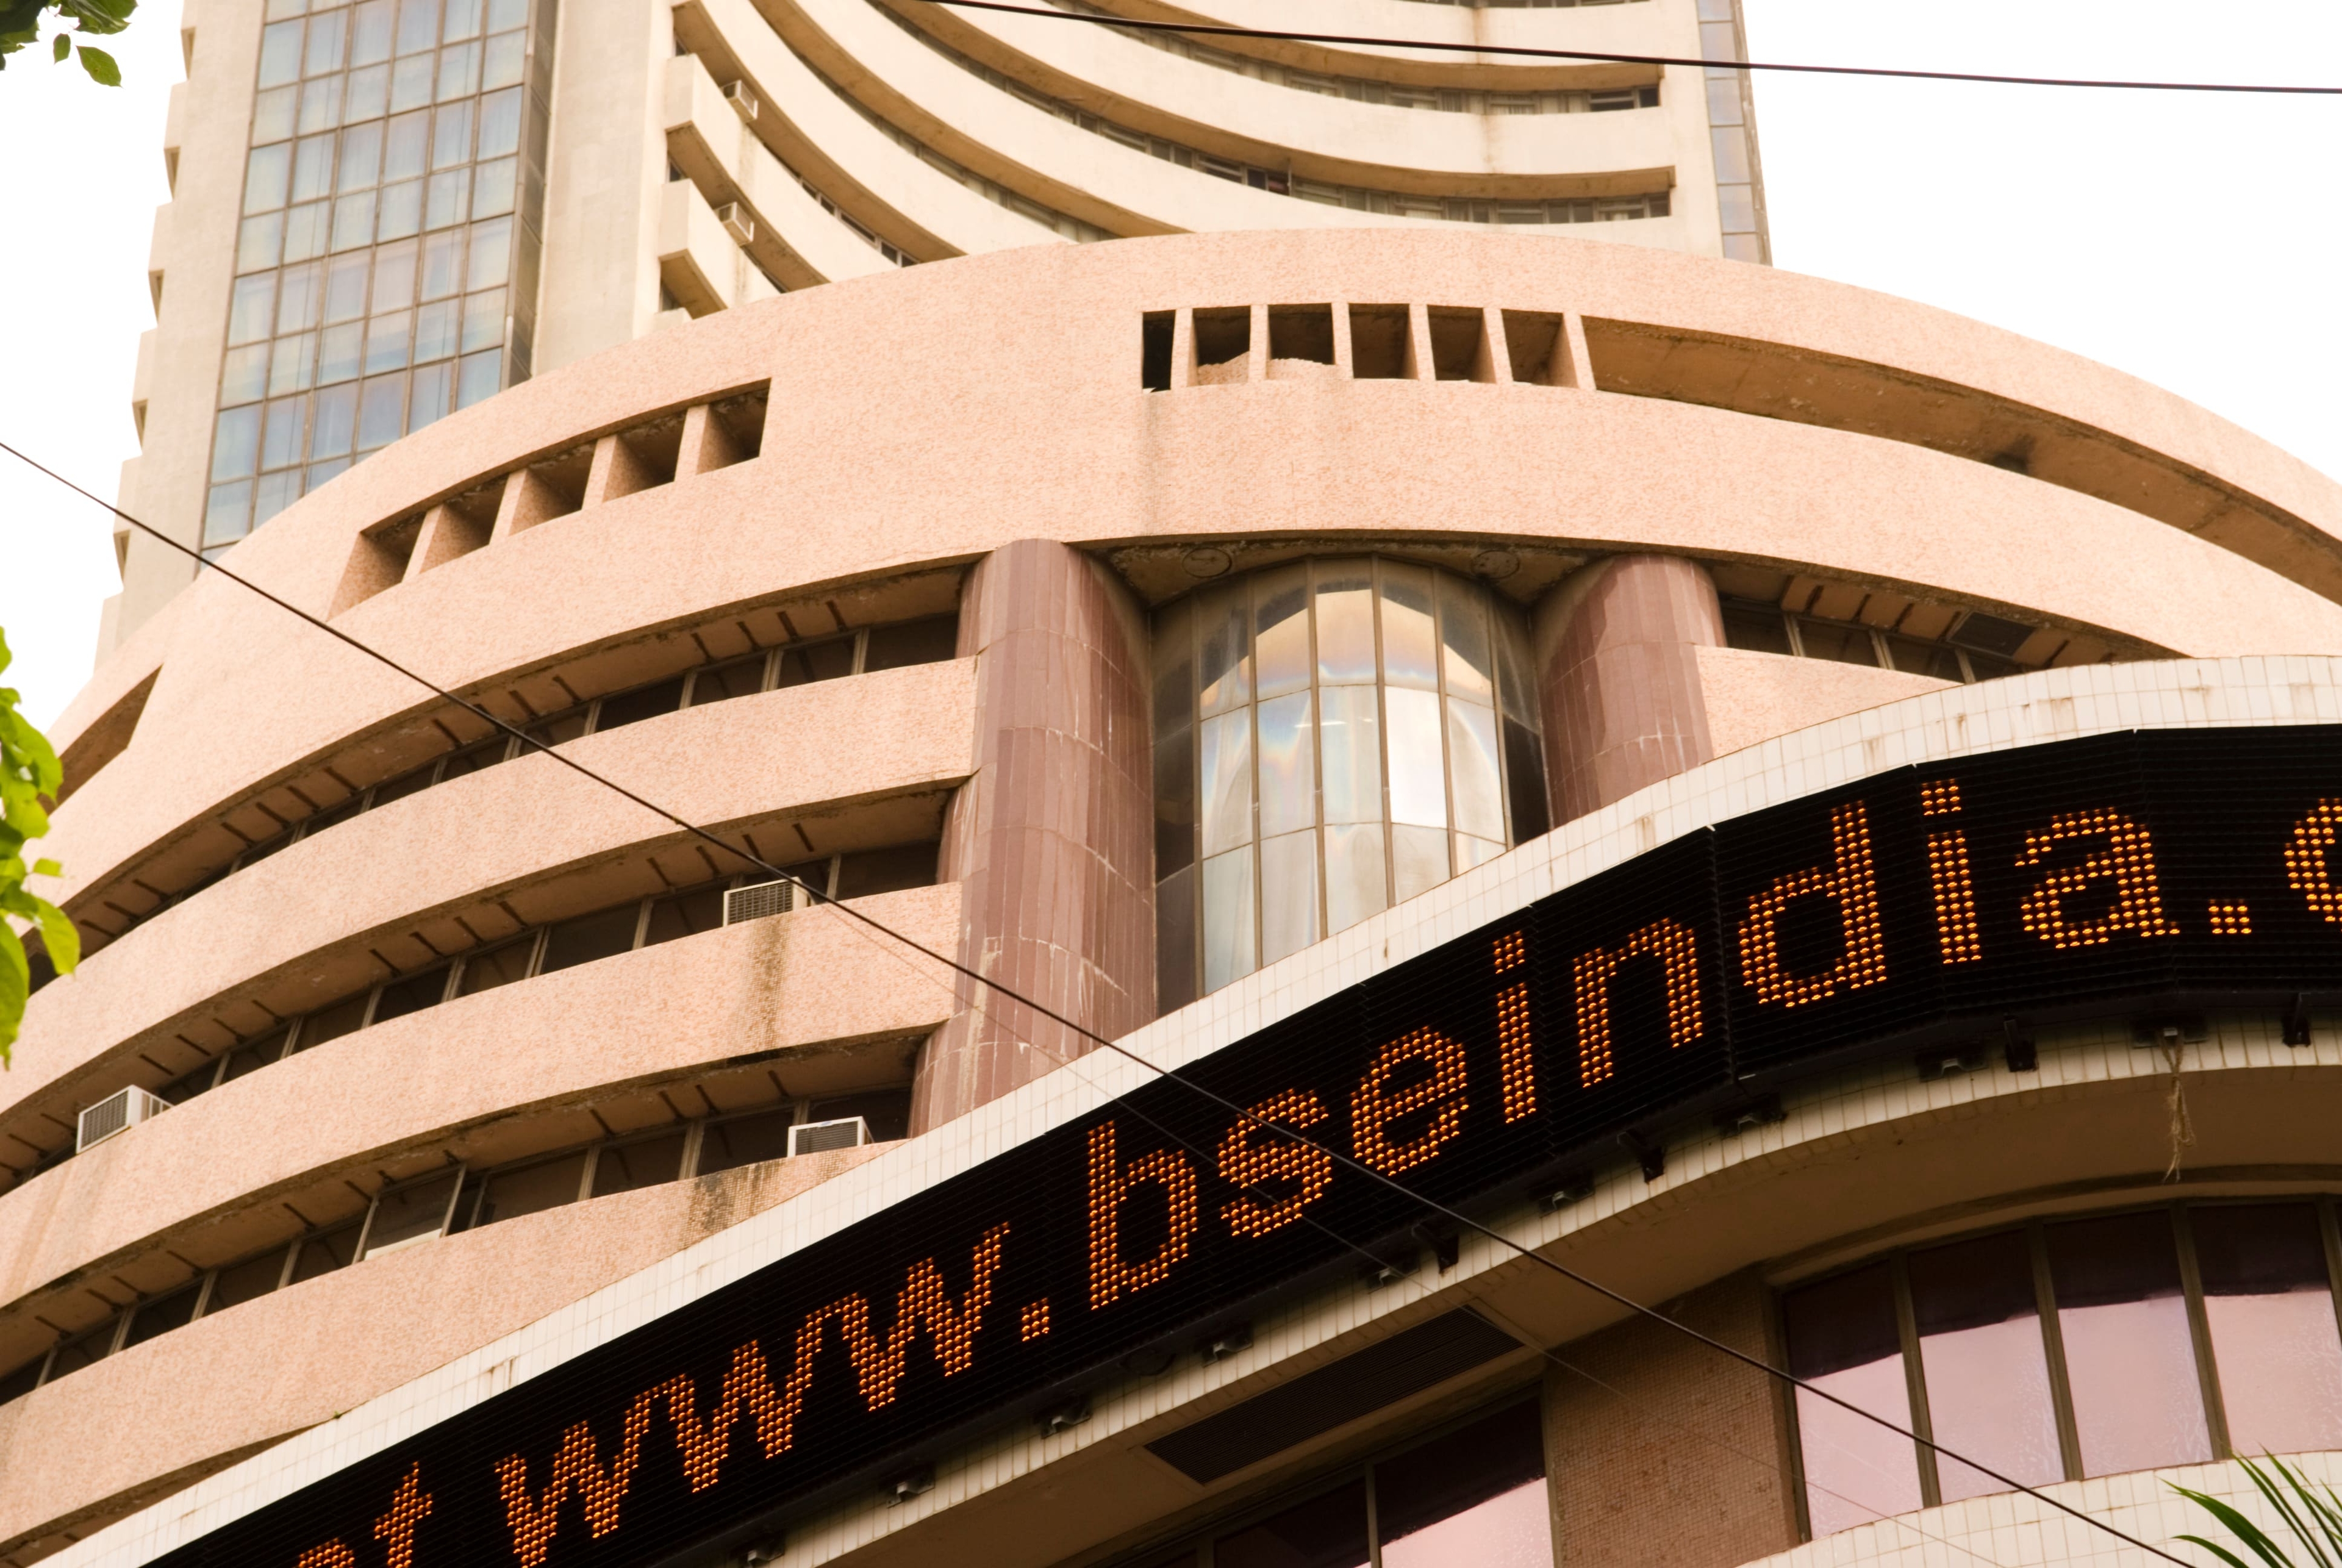 Uncertainties over the ongoing Ukraine war along with concerns over Chinese restrictions to curb the fresh spread of Covid-19 punctured market sentiment as the key equity indices the Sensex and the Nifty ended a percent lower on March 21, breaking a two-day winning run. Sensex closed 571 points, or 0.99 percent, lower at 57,292.49 while the Nifty finished at 17,117.60, down 169 points, or 0.98 percent.